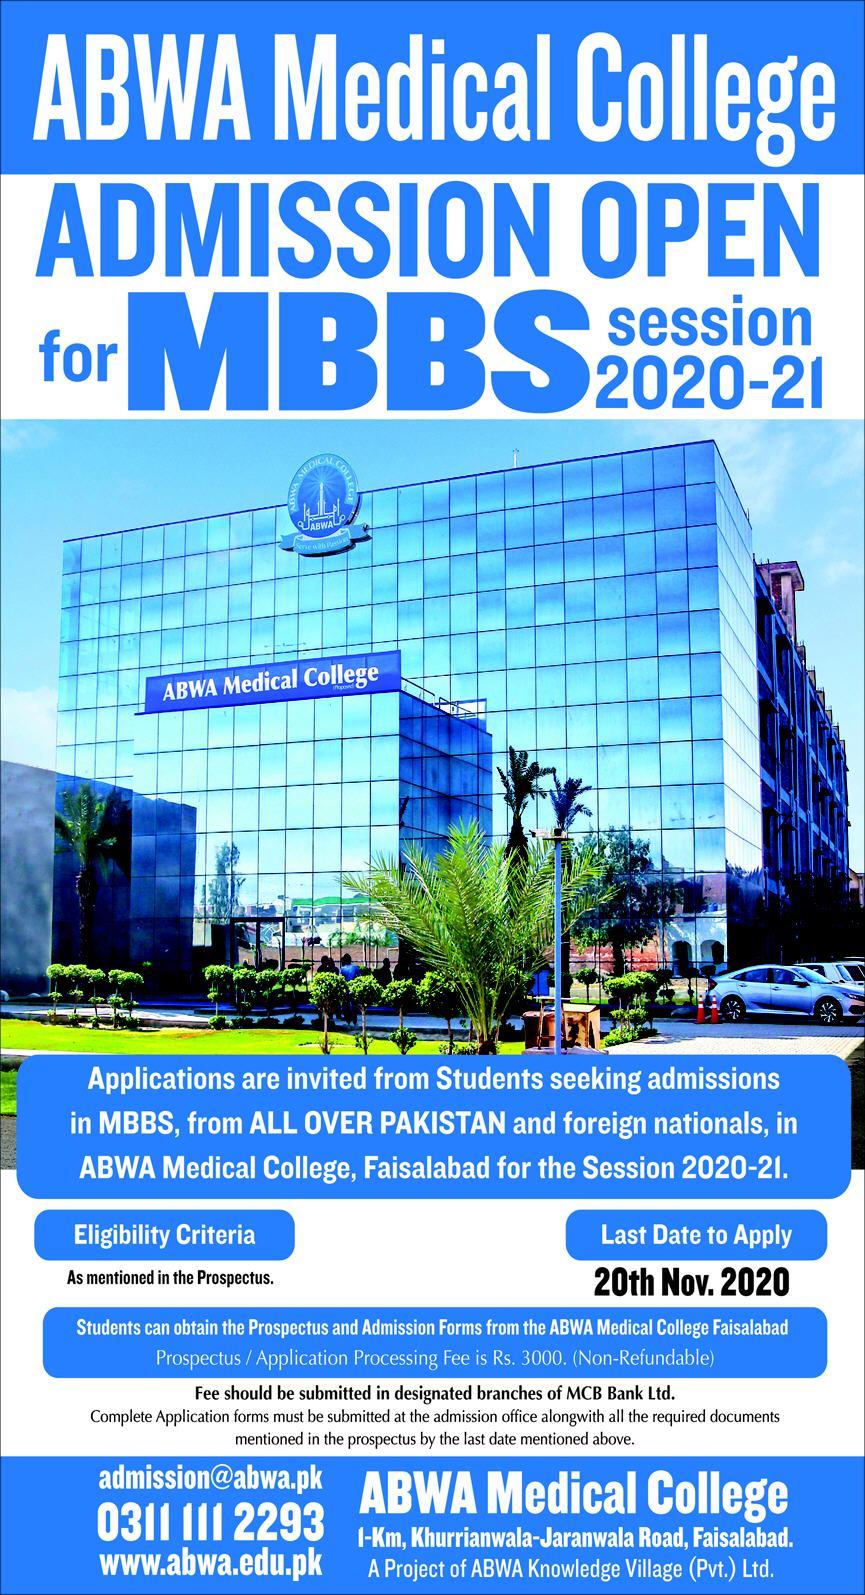 ABWA Medical College Faisalabad Admission 2020 in MBBS